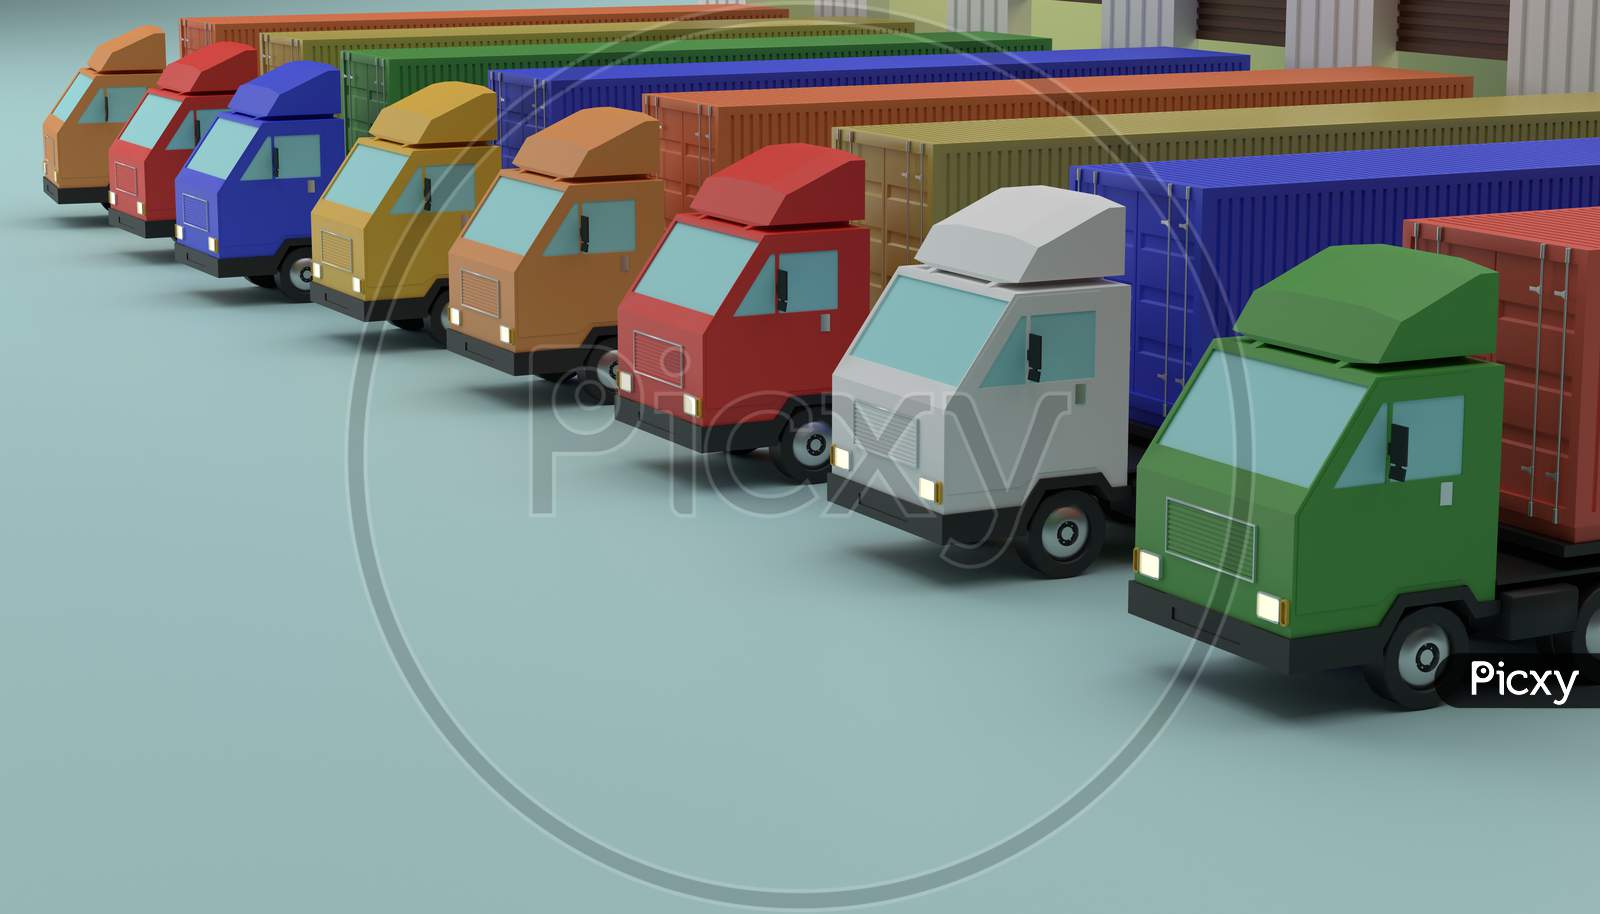 Container Trucks At Storehouse 3D Render Illustration